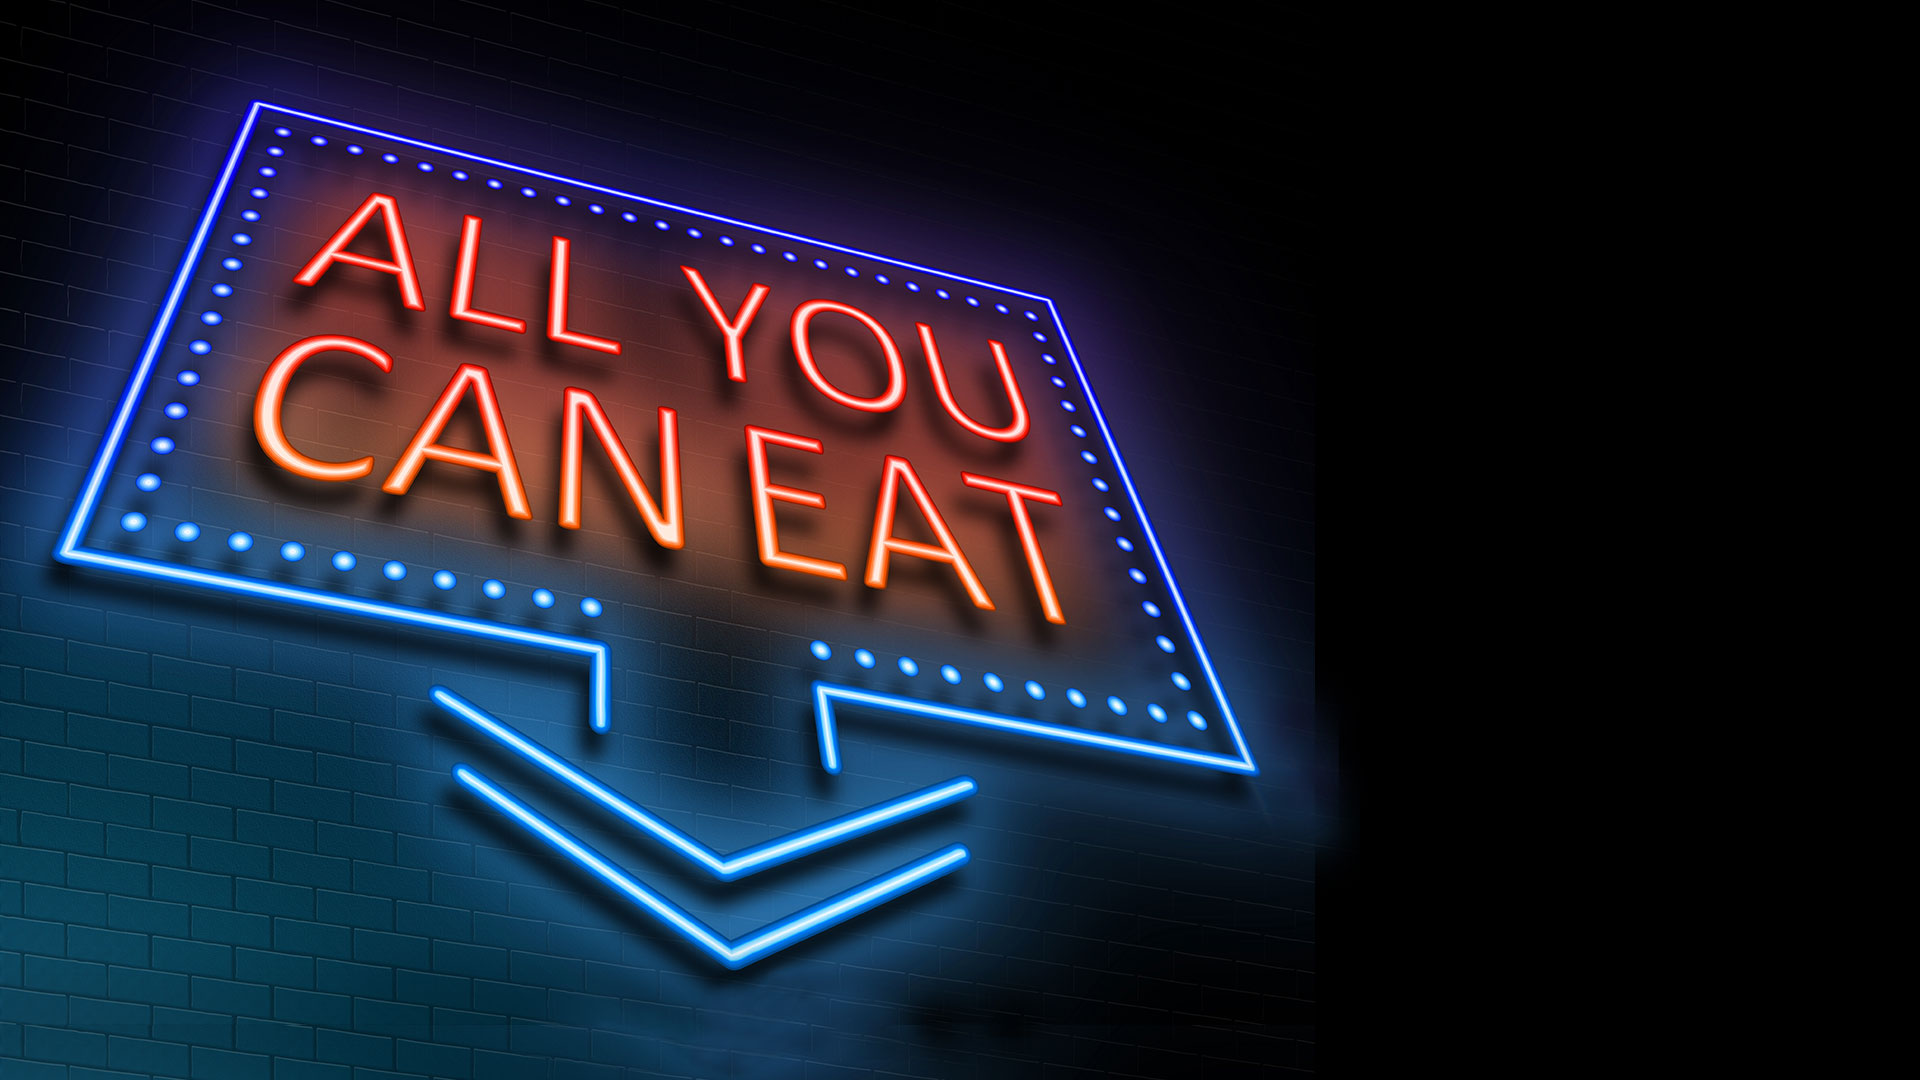 All you can eat neon sign